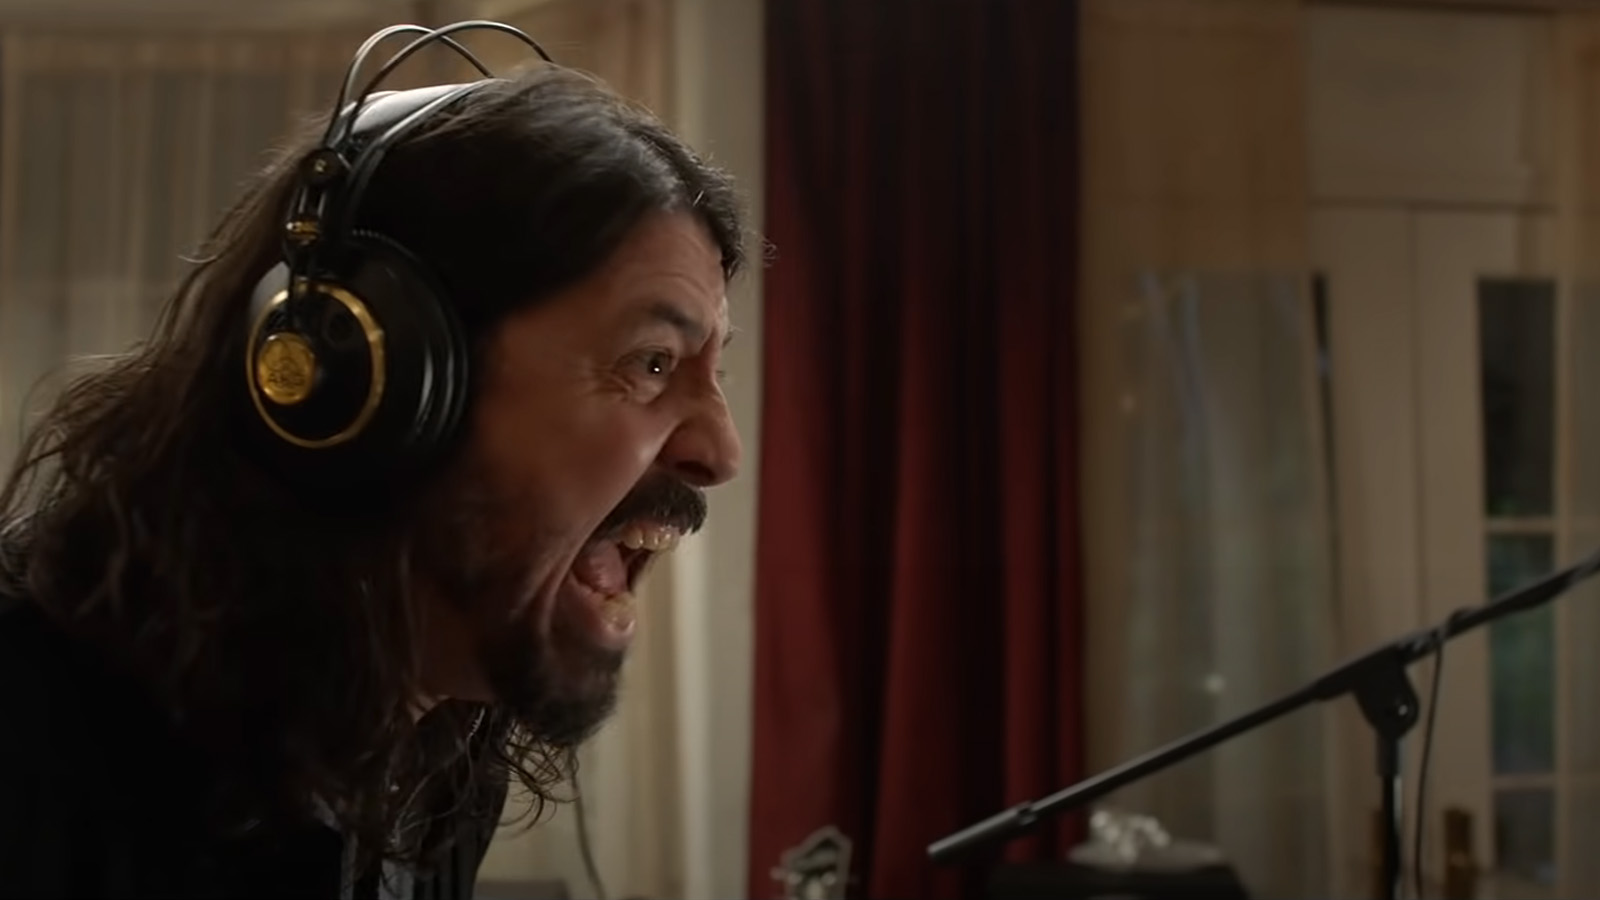 Dave Grohl has a Whiplash moment with drummer Taylor Hawkins. Image © Sony Pictures